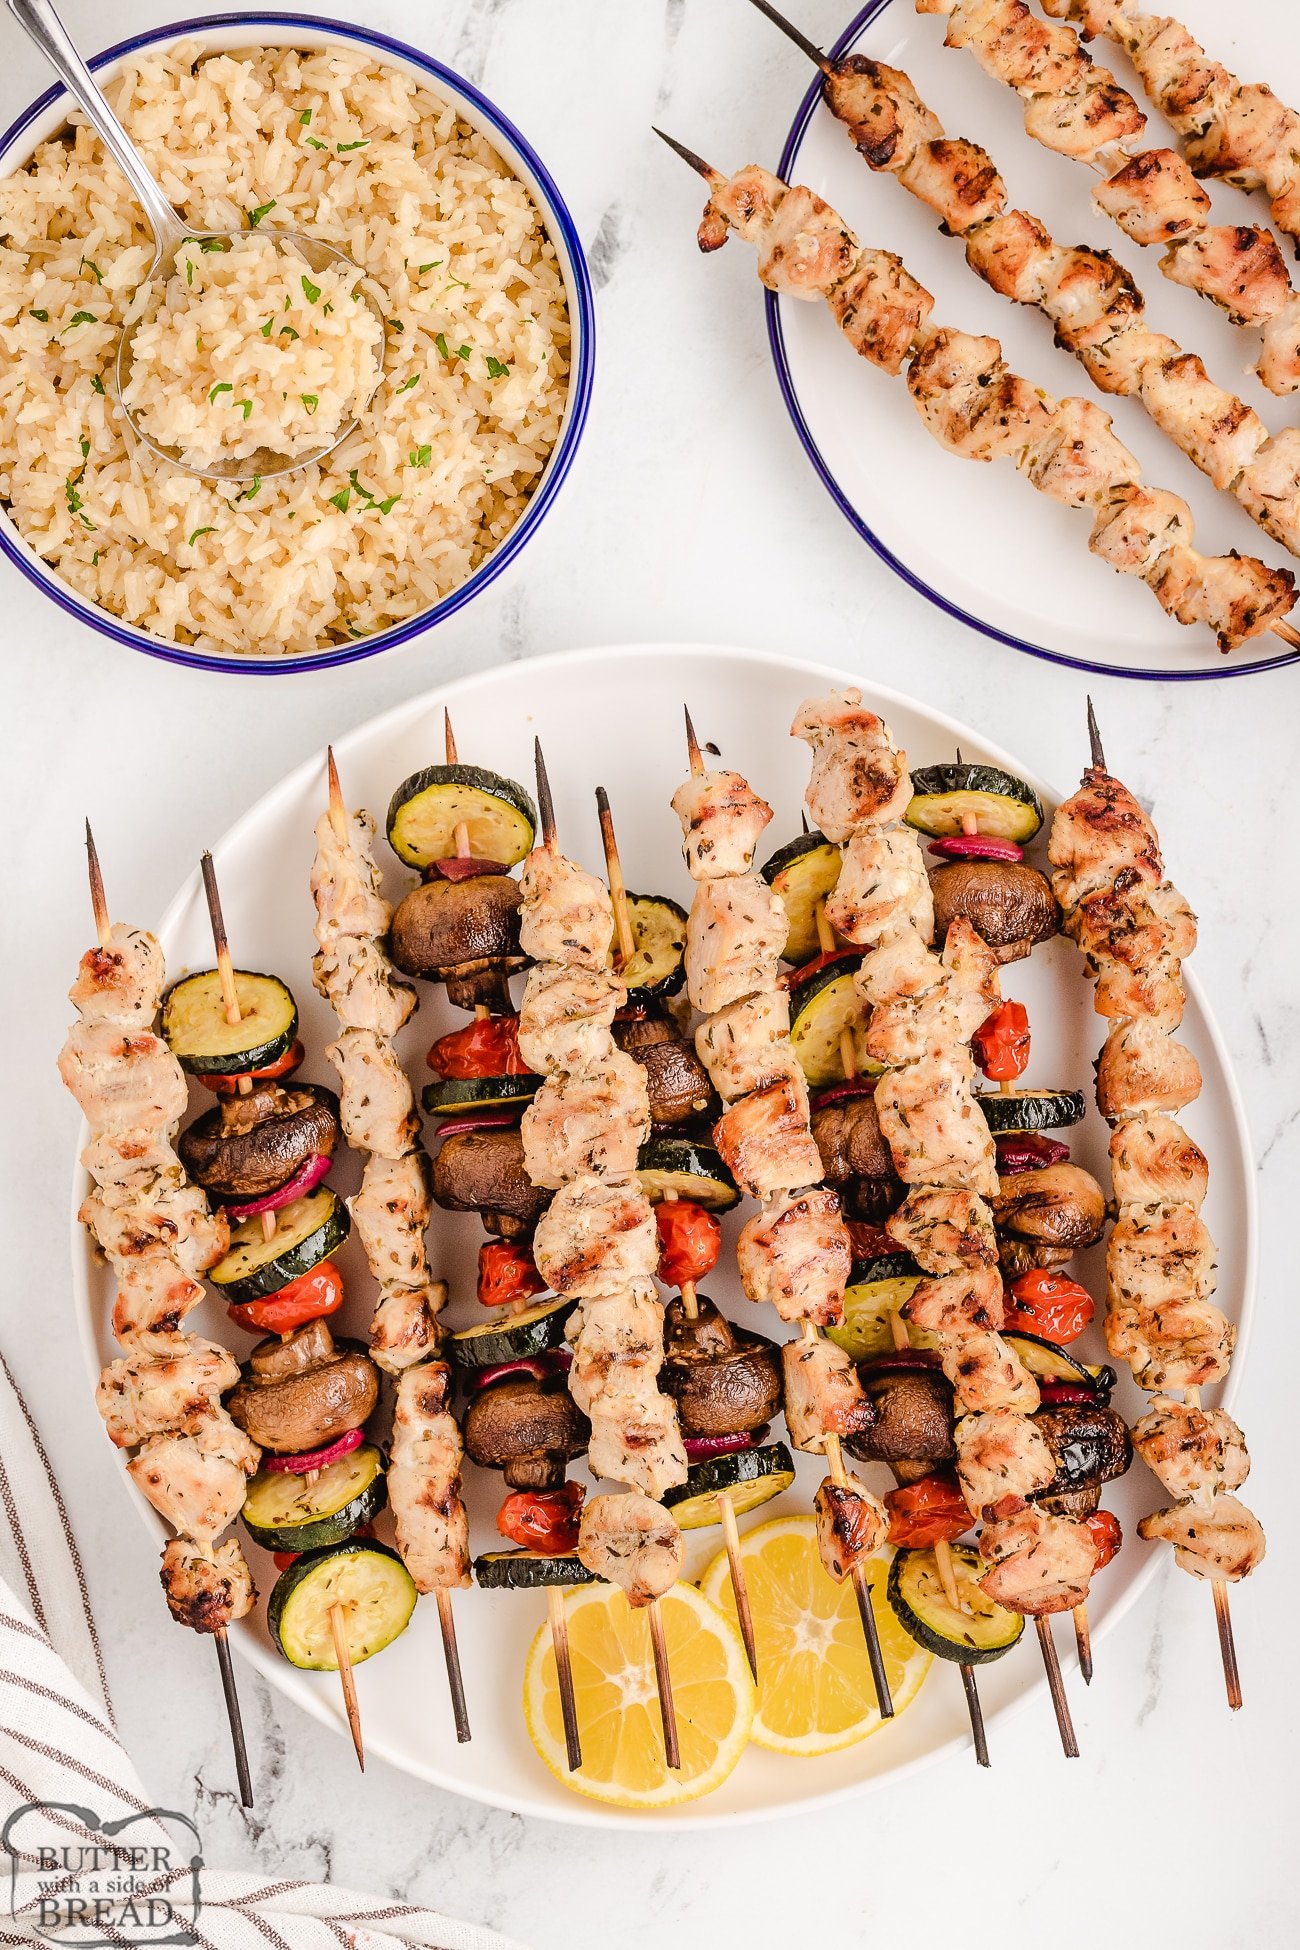 Greek chicken with grilled vegetables and lemon rice